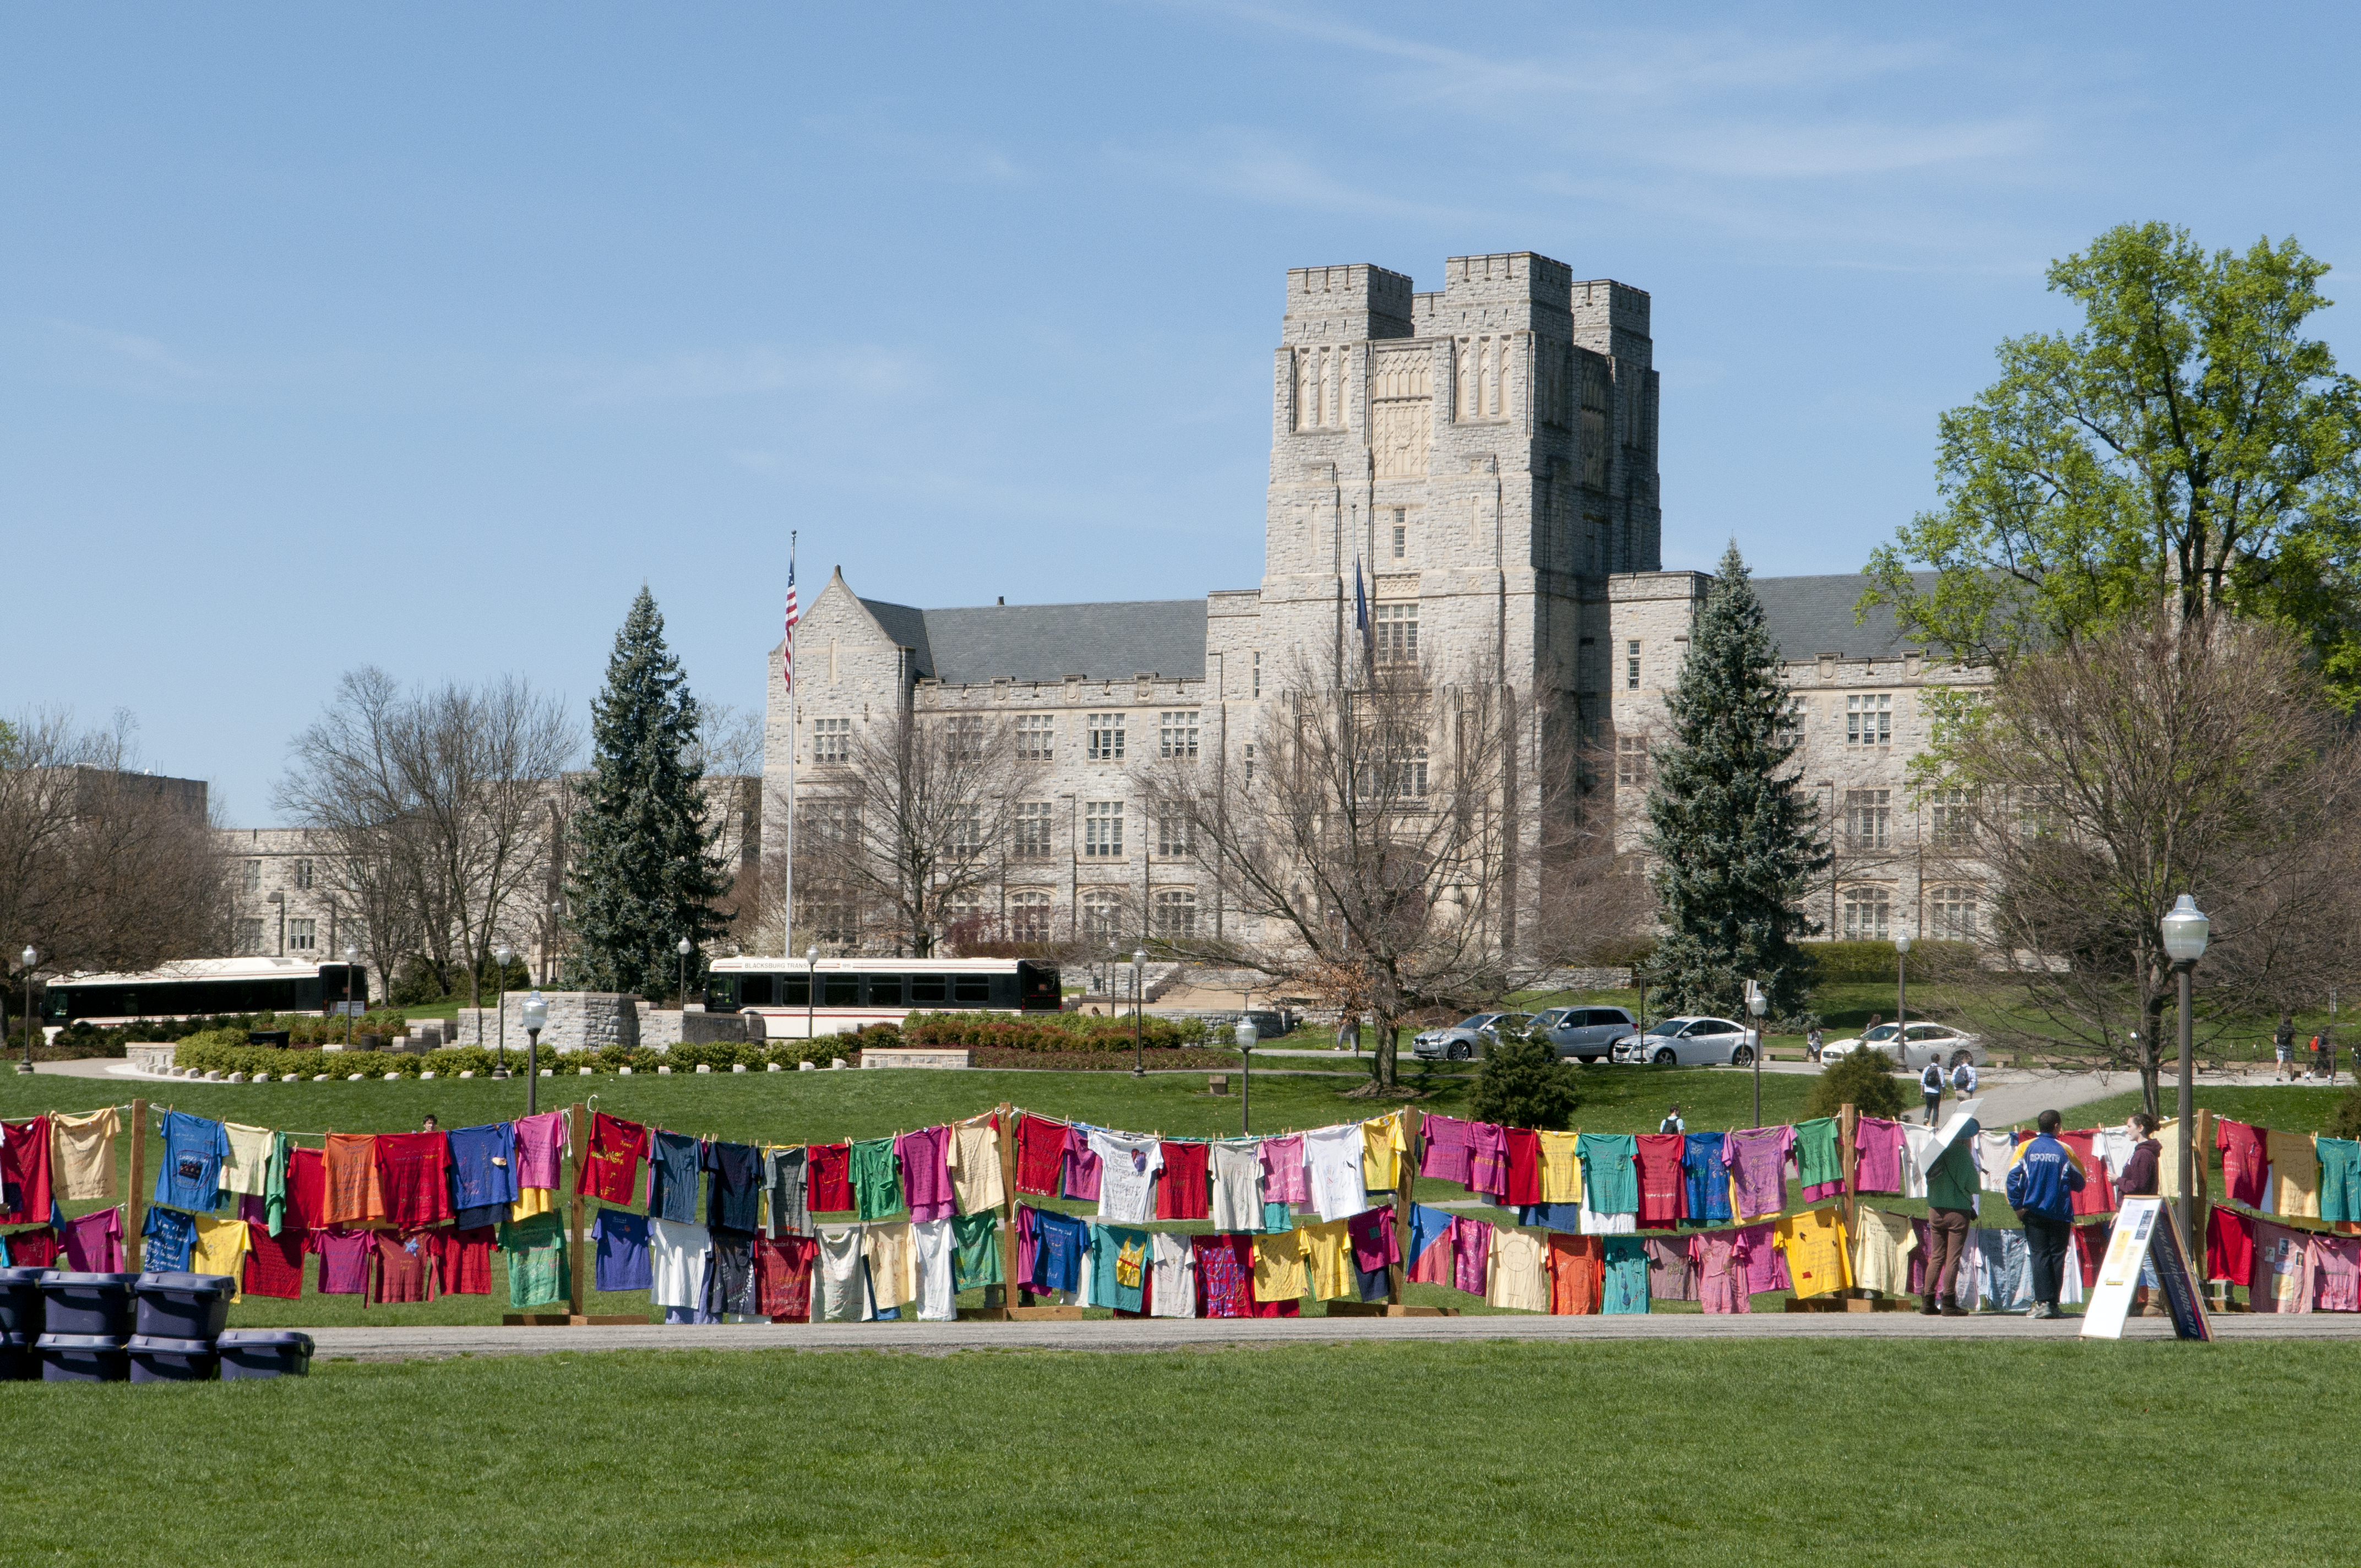 Clothesline Project on the Drillfield